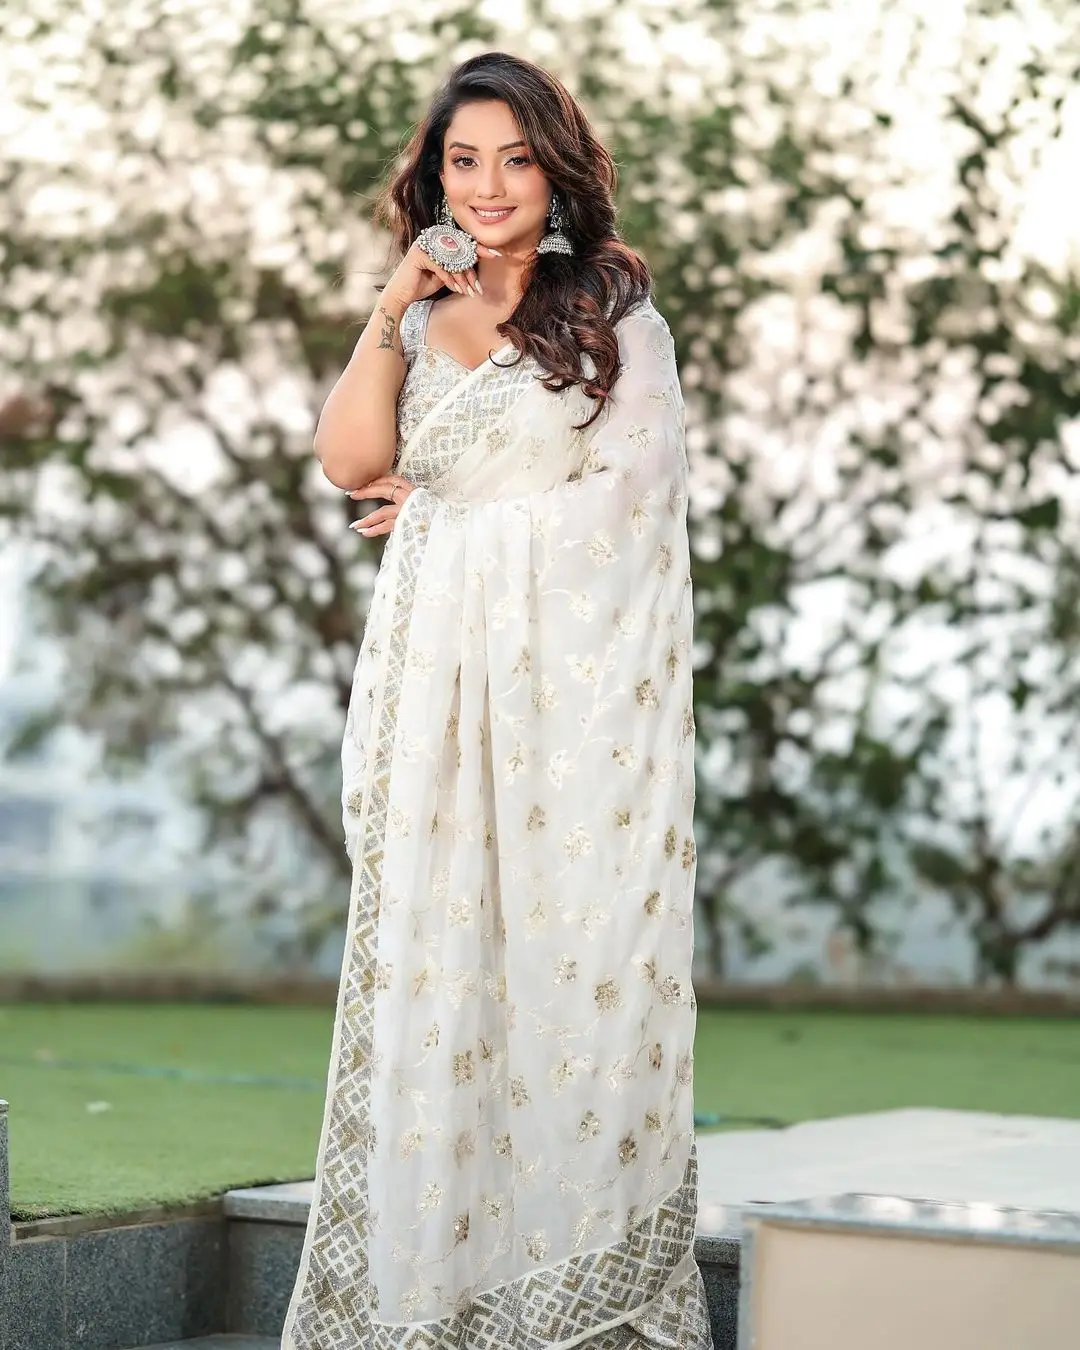 INDIAN GIRL ADAA KHAN IN TRADITIONAL WHITE SAREE SLEEVELESS BLOUSE 9